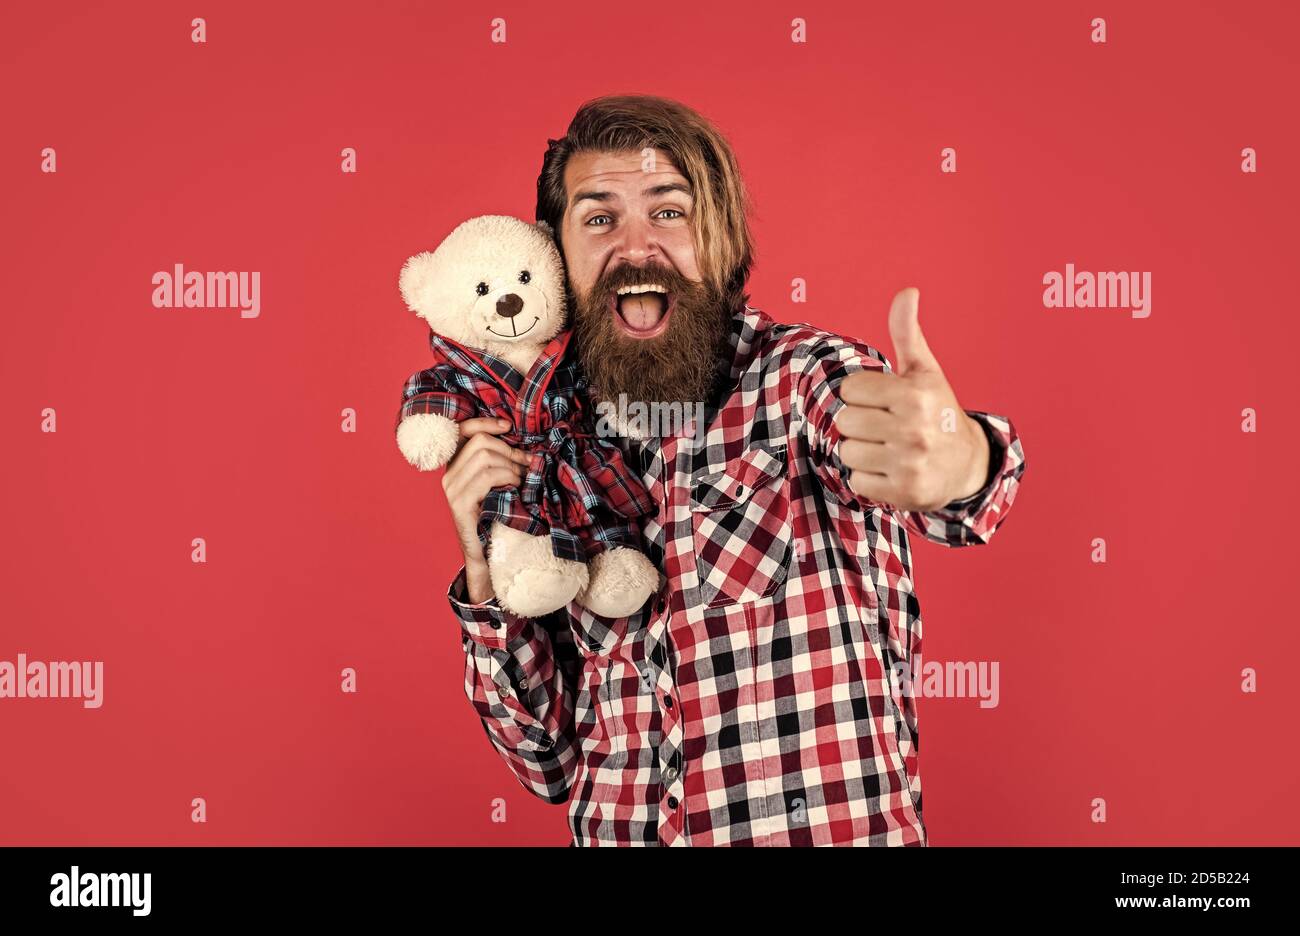 best offer. Man holds teddy bear. Gifts and holidays concept. This is for you. hipster like animal toy. Birthday holiday party celebration. feel happiness. Man with beard hold cute toy bear. Stock Photo